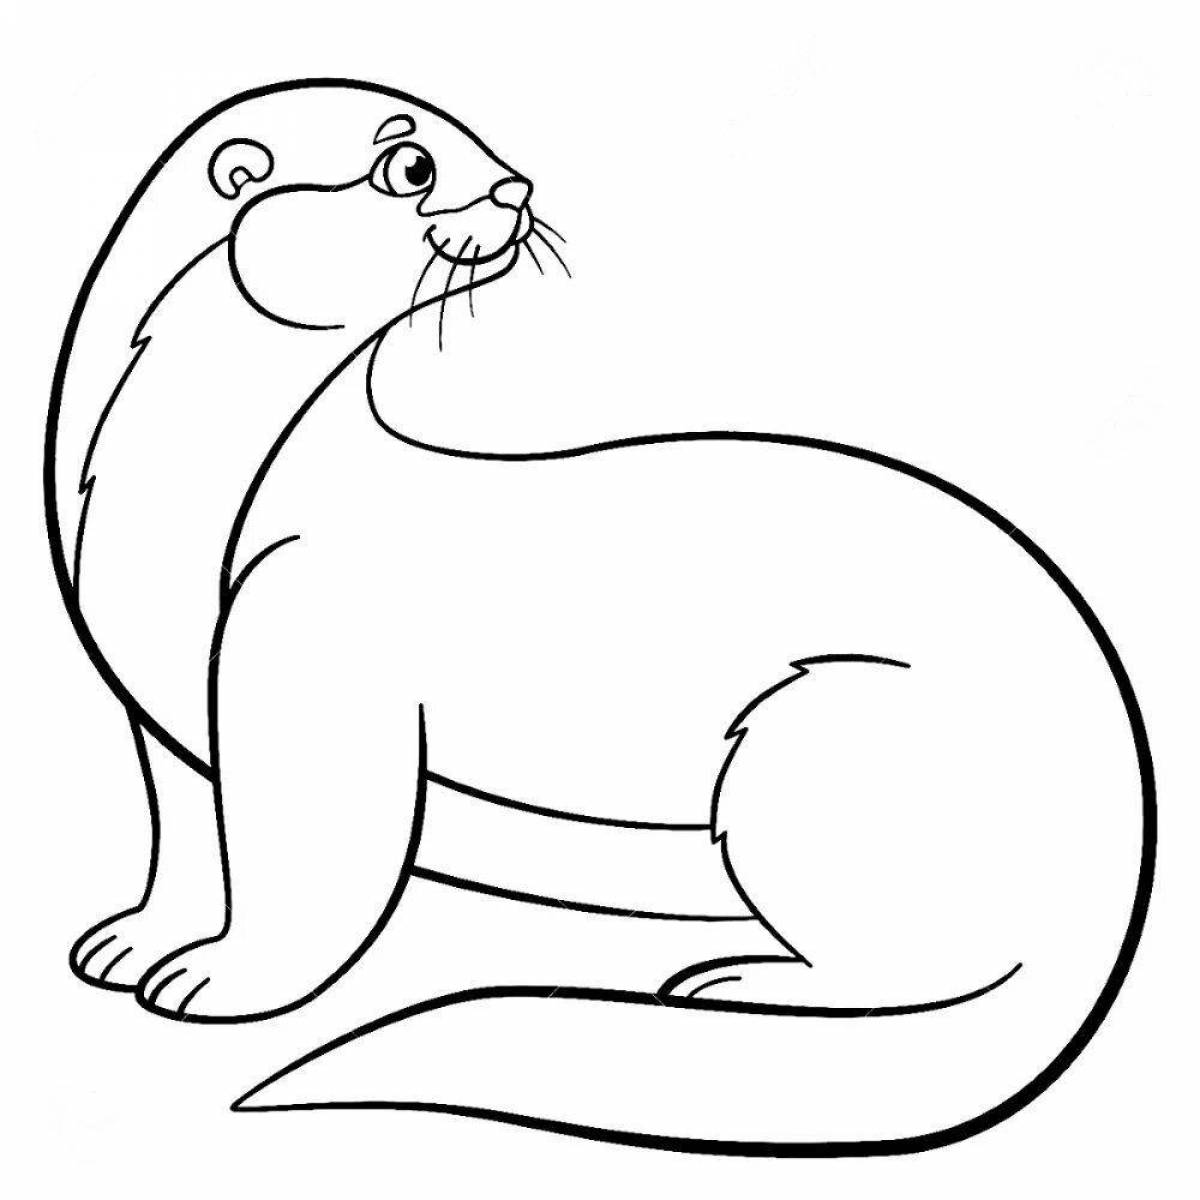 Otter live coloring for kids